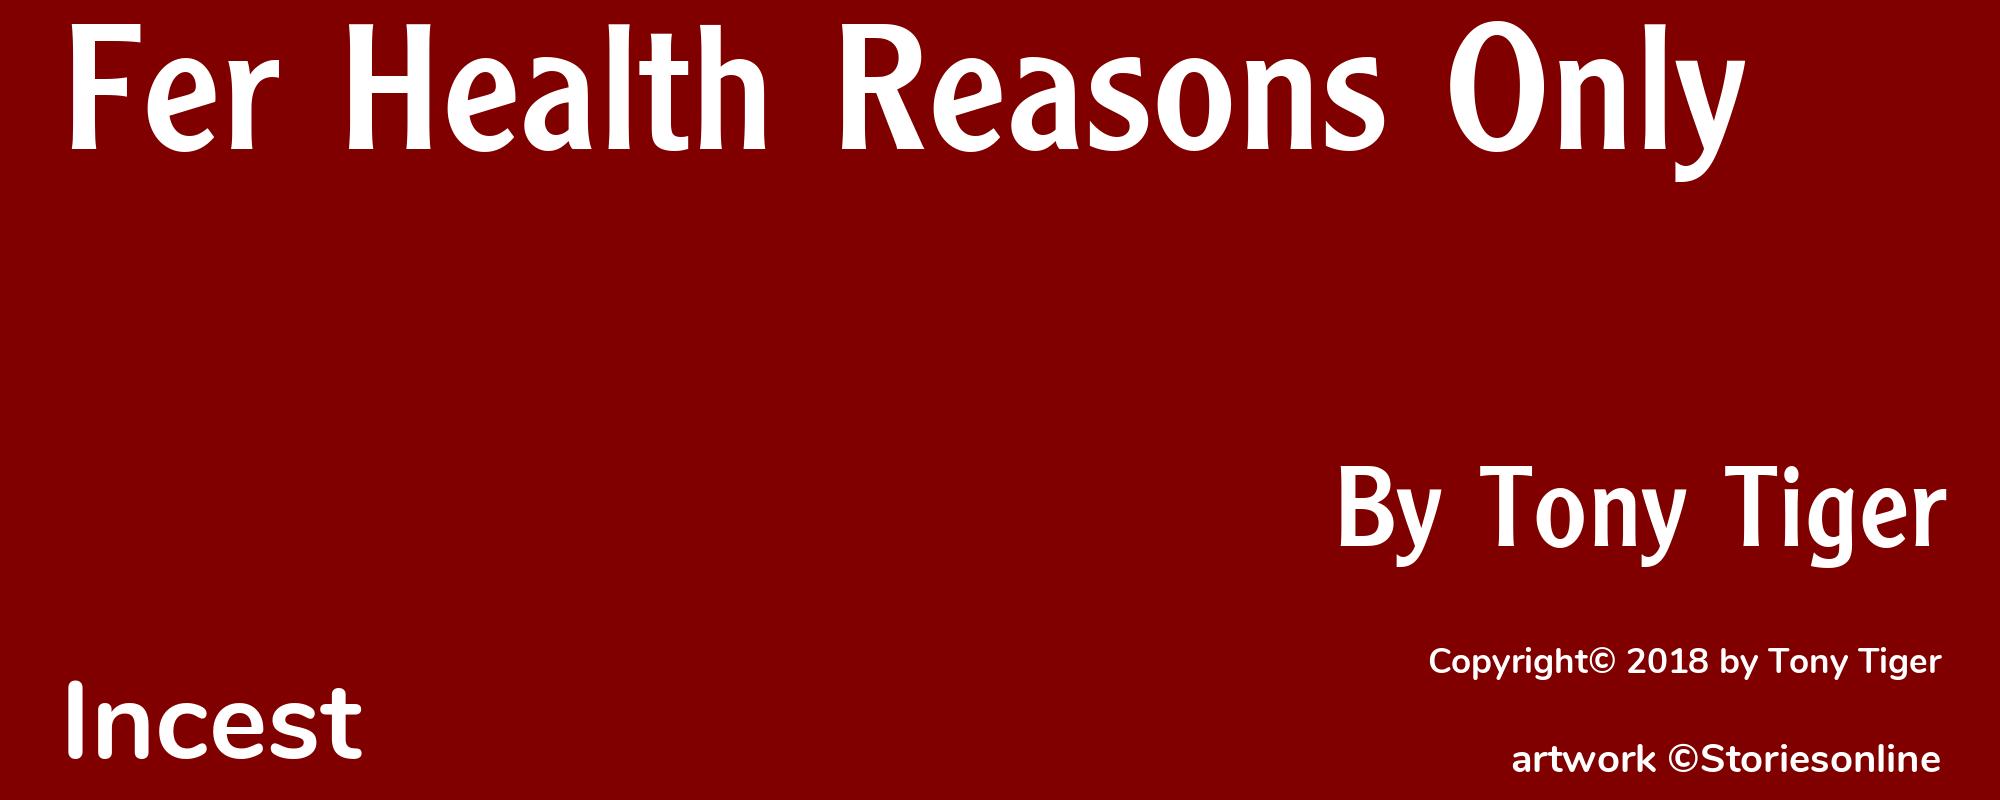 Fer Health Reasons Only - Cover